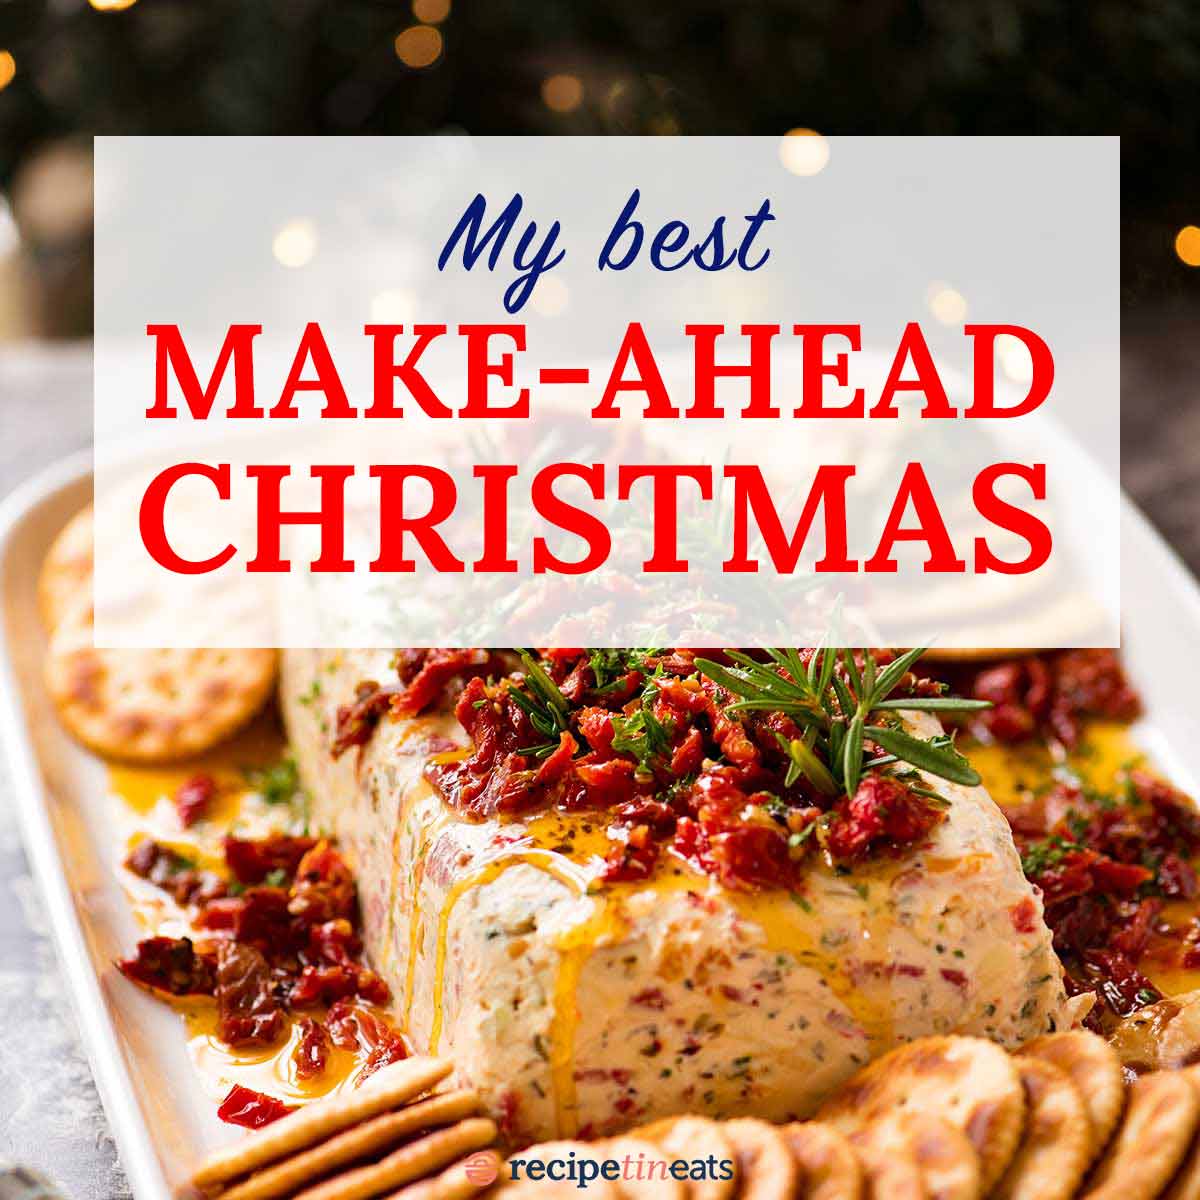 https://www.recipetineats.com/wp-content/uploads/2022/12/Make-ahead-Christmas-featured-image.jpg